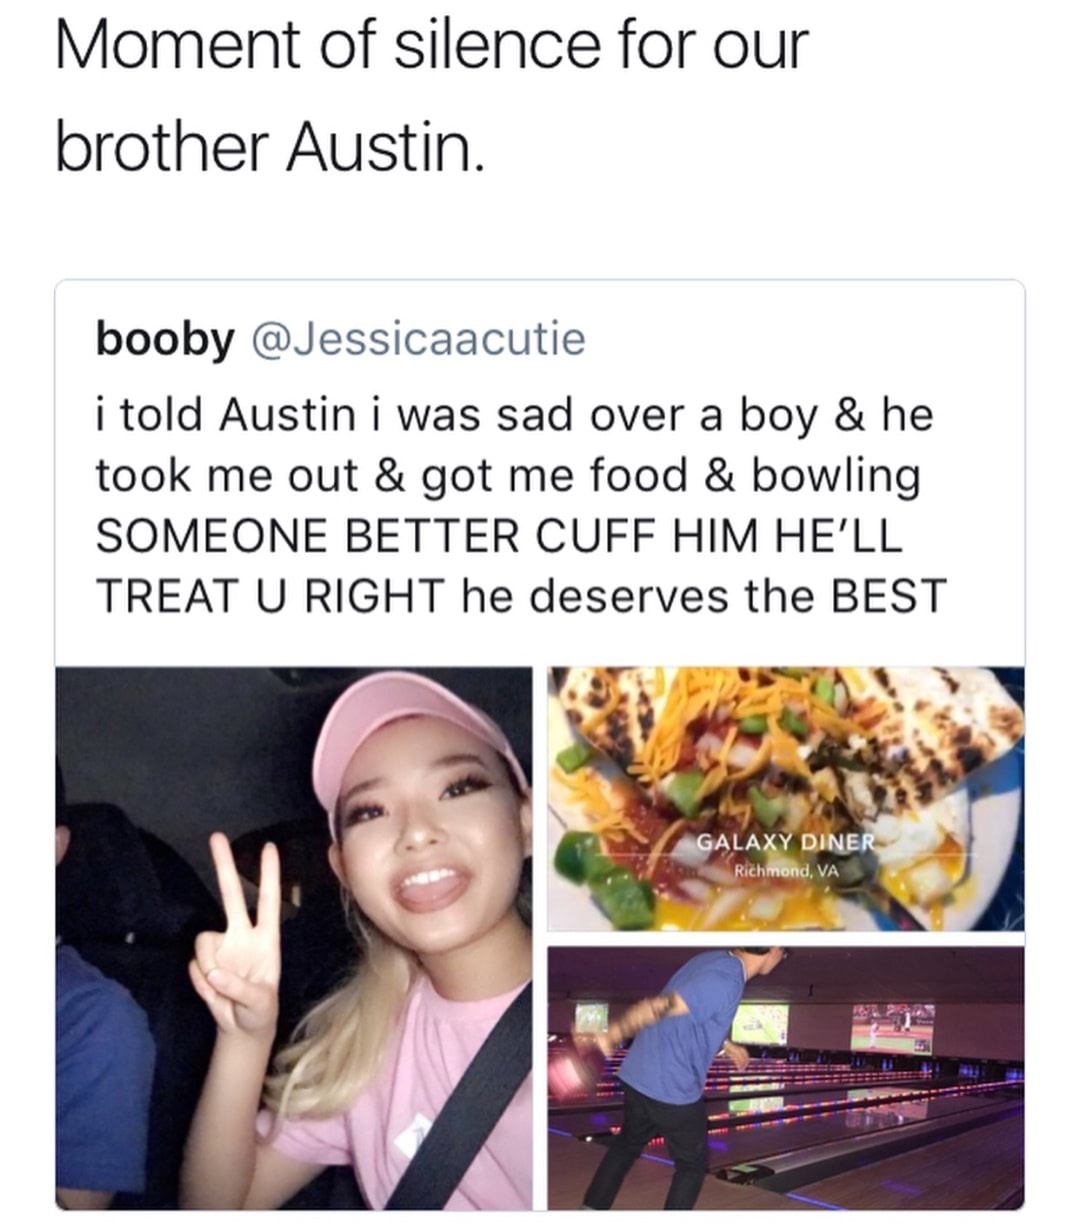 moment of silence friendzone memes - Moment of silence for our brother Austin. booby i told Austin i was sad over a boy & he took me out & got me food & bowling Someone Better Cuff Him He'Ll Treat U Right he deserves the Best Galaxy Diner Richmond, Va